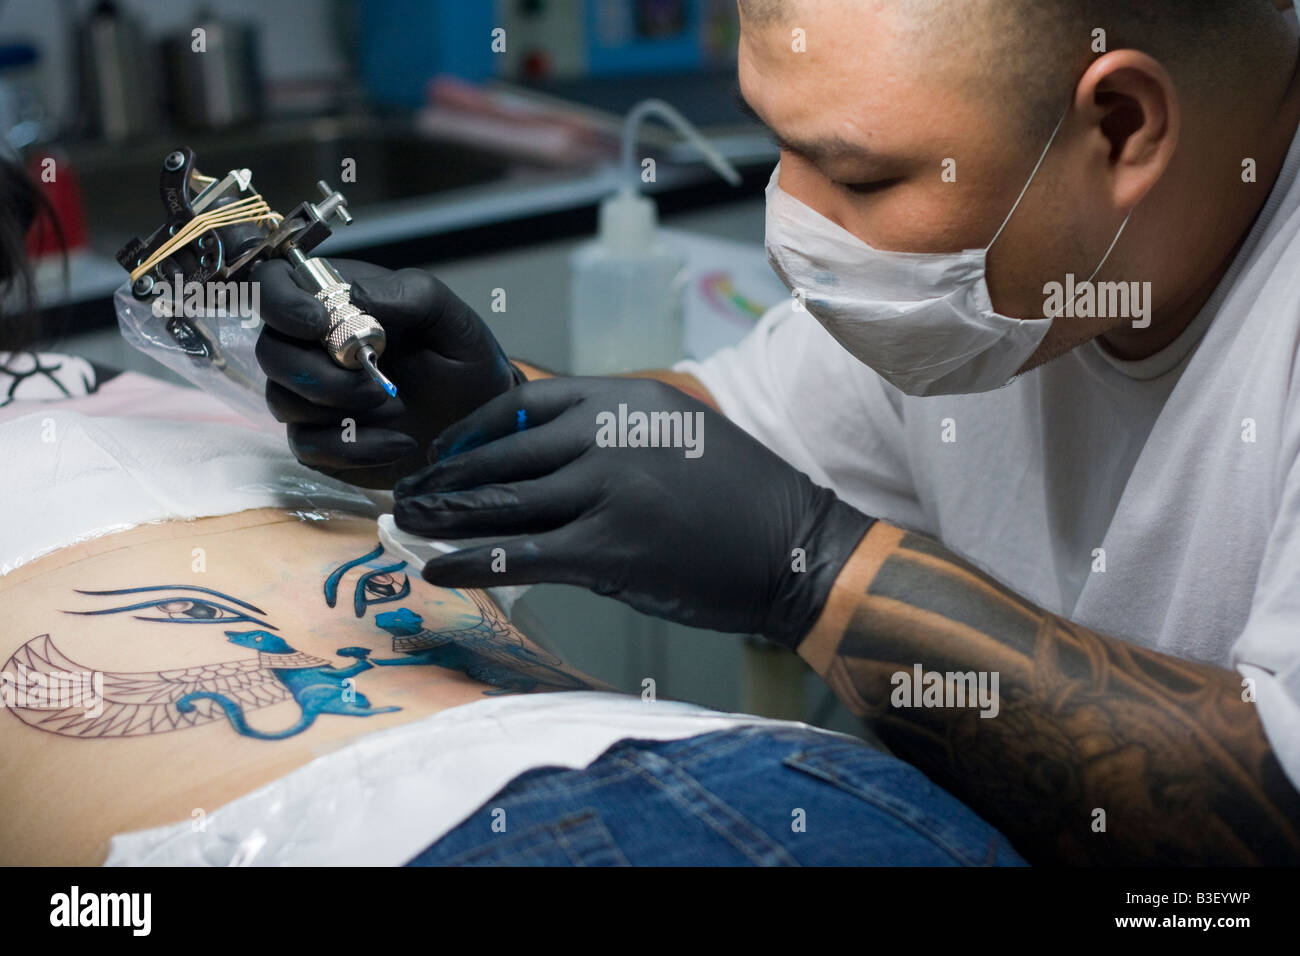 Young female Taiwanese Chinese receiving lower back tattoo from Asian male with shaved head, Taipei Taiwan Republic of China ROC Stock Photo